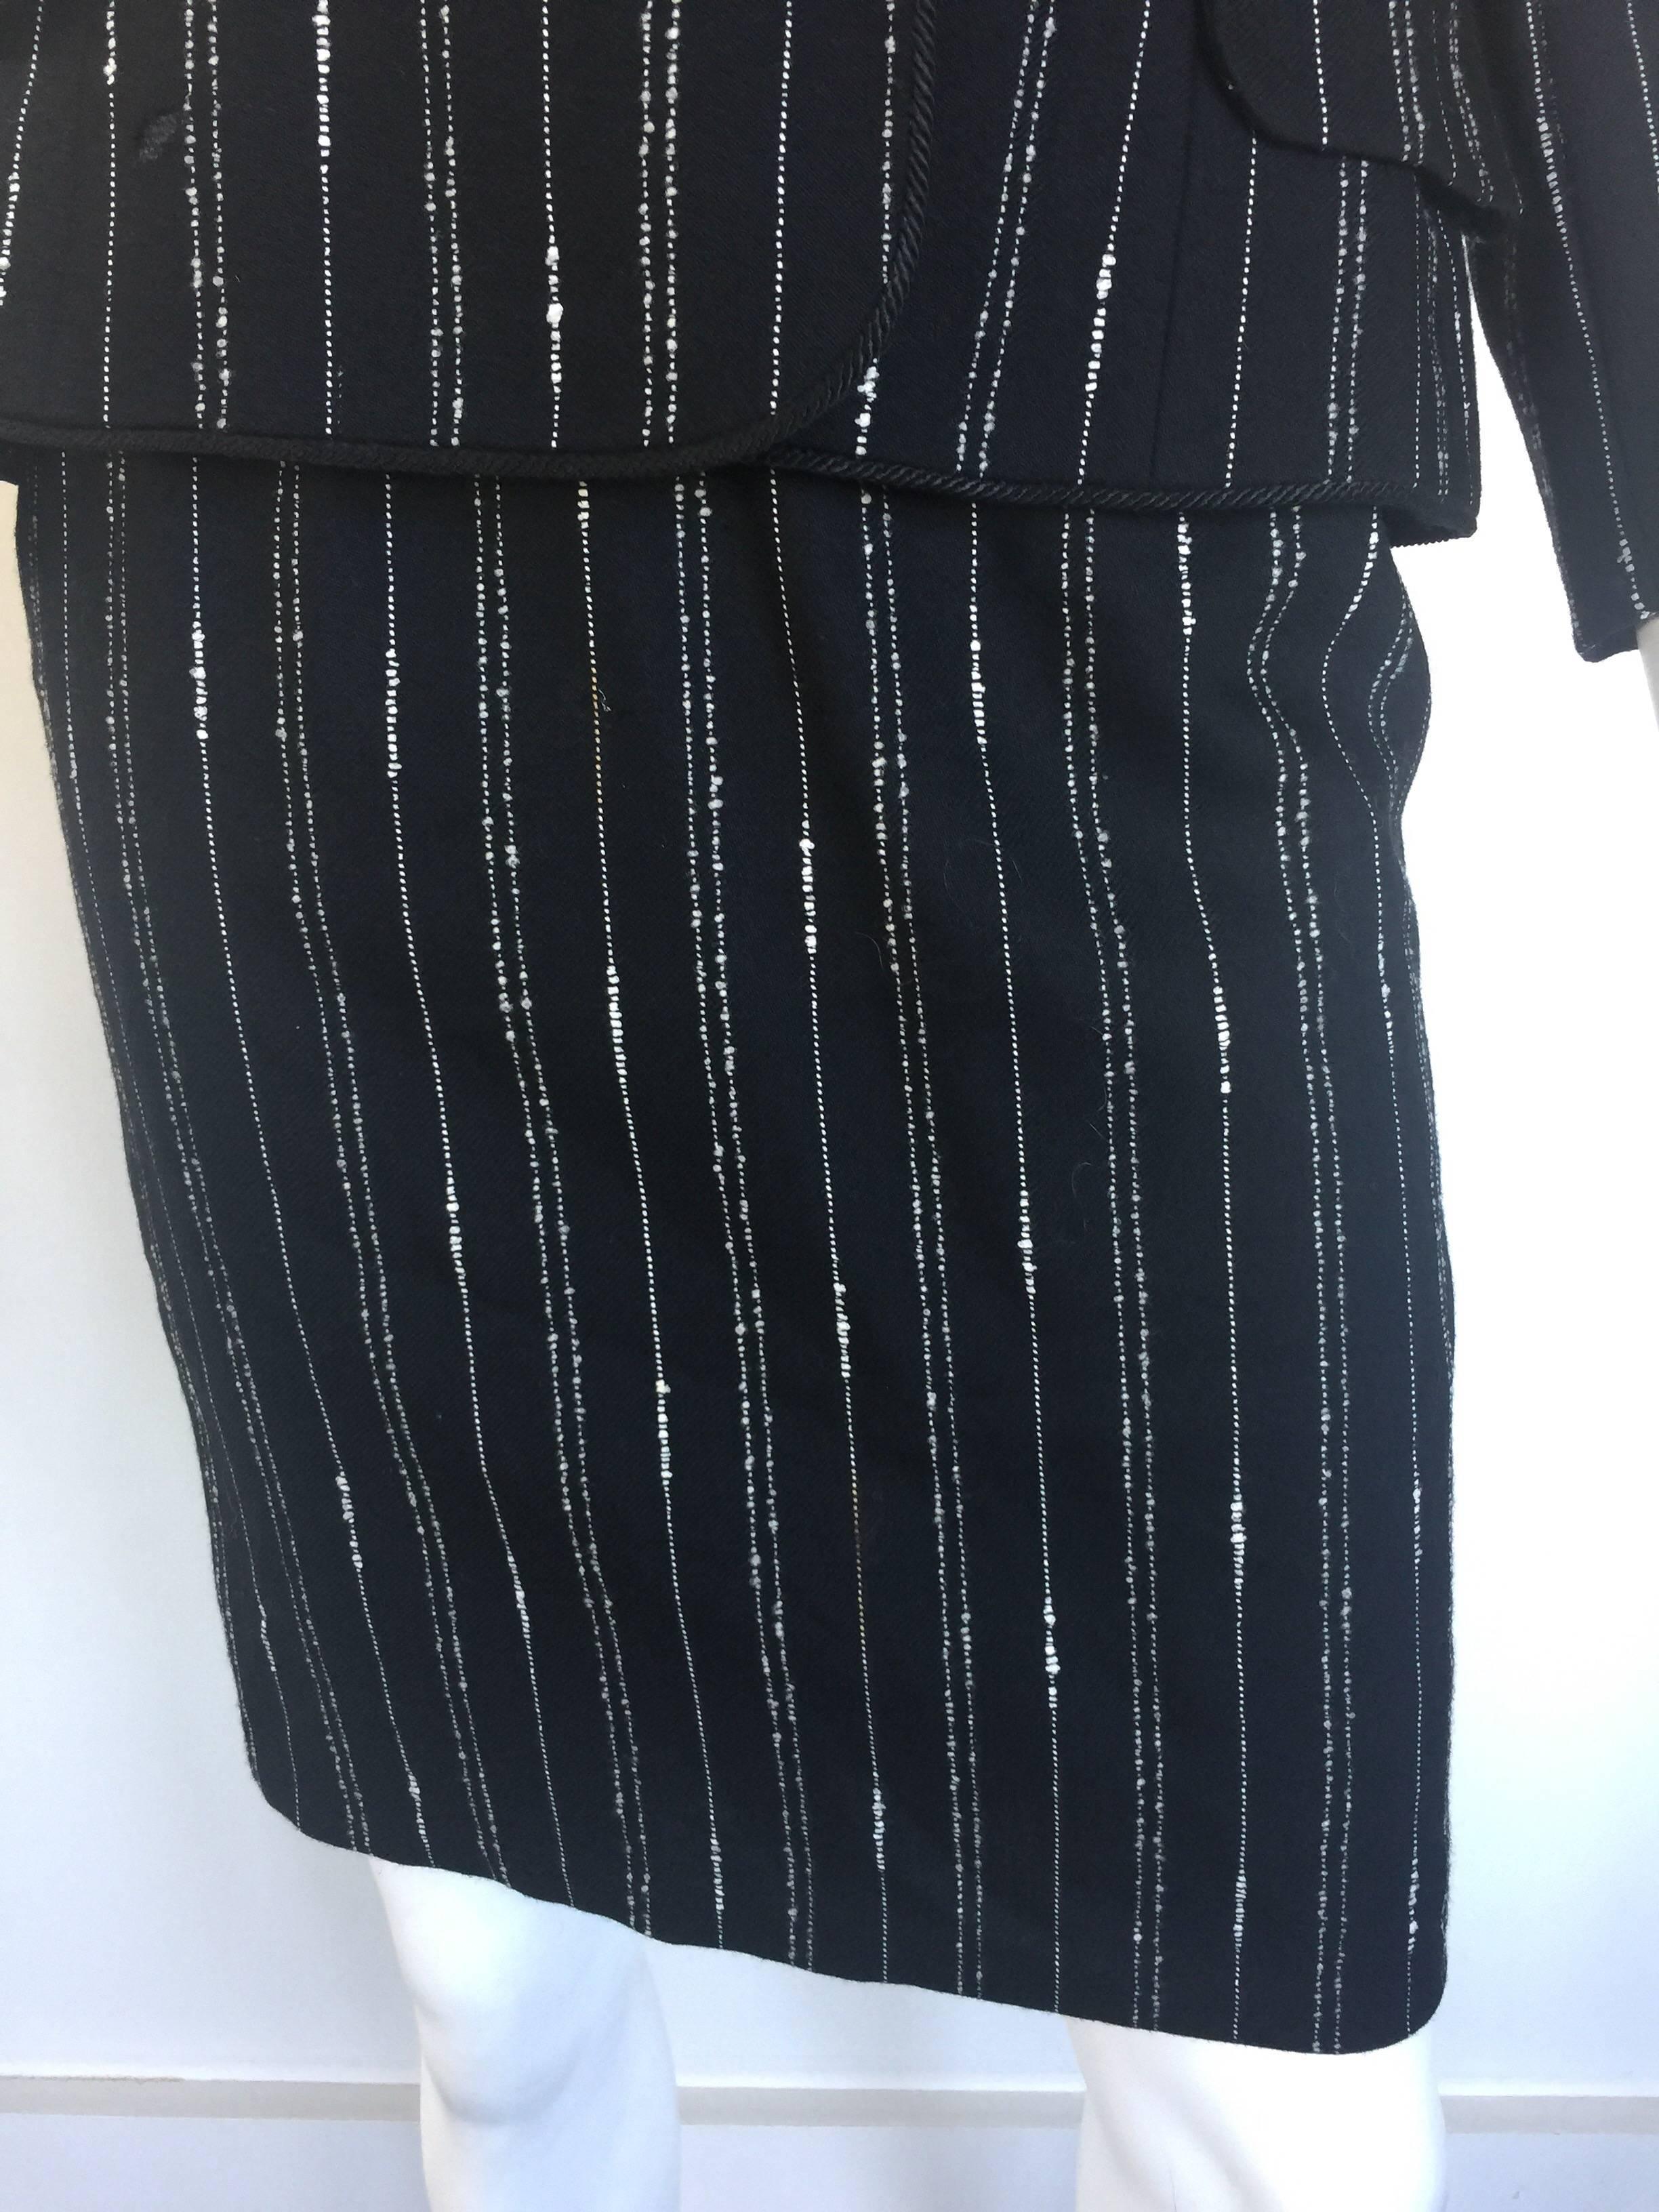 Givenchy black and white pinstripe skirt suit In Fair Condition For Sale In New York, NY